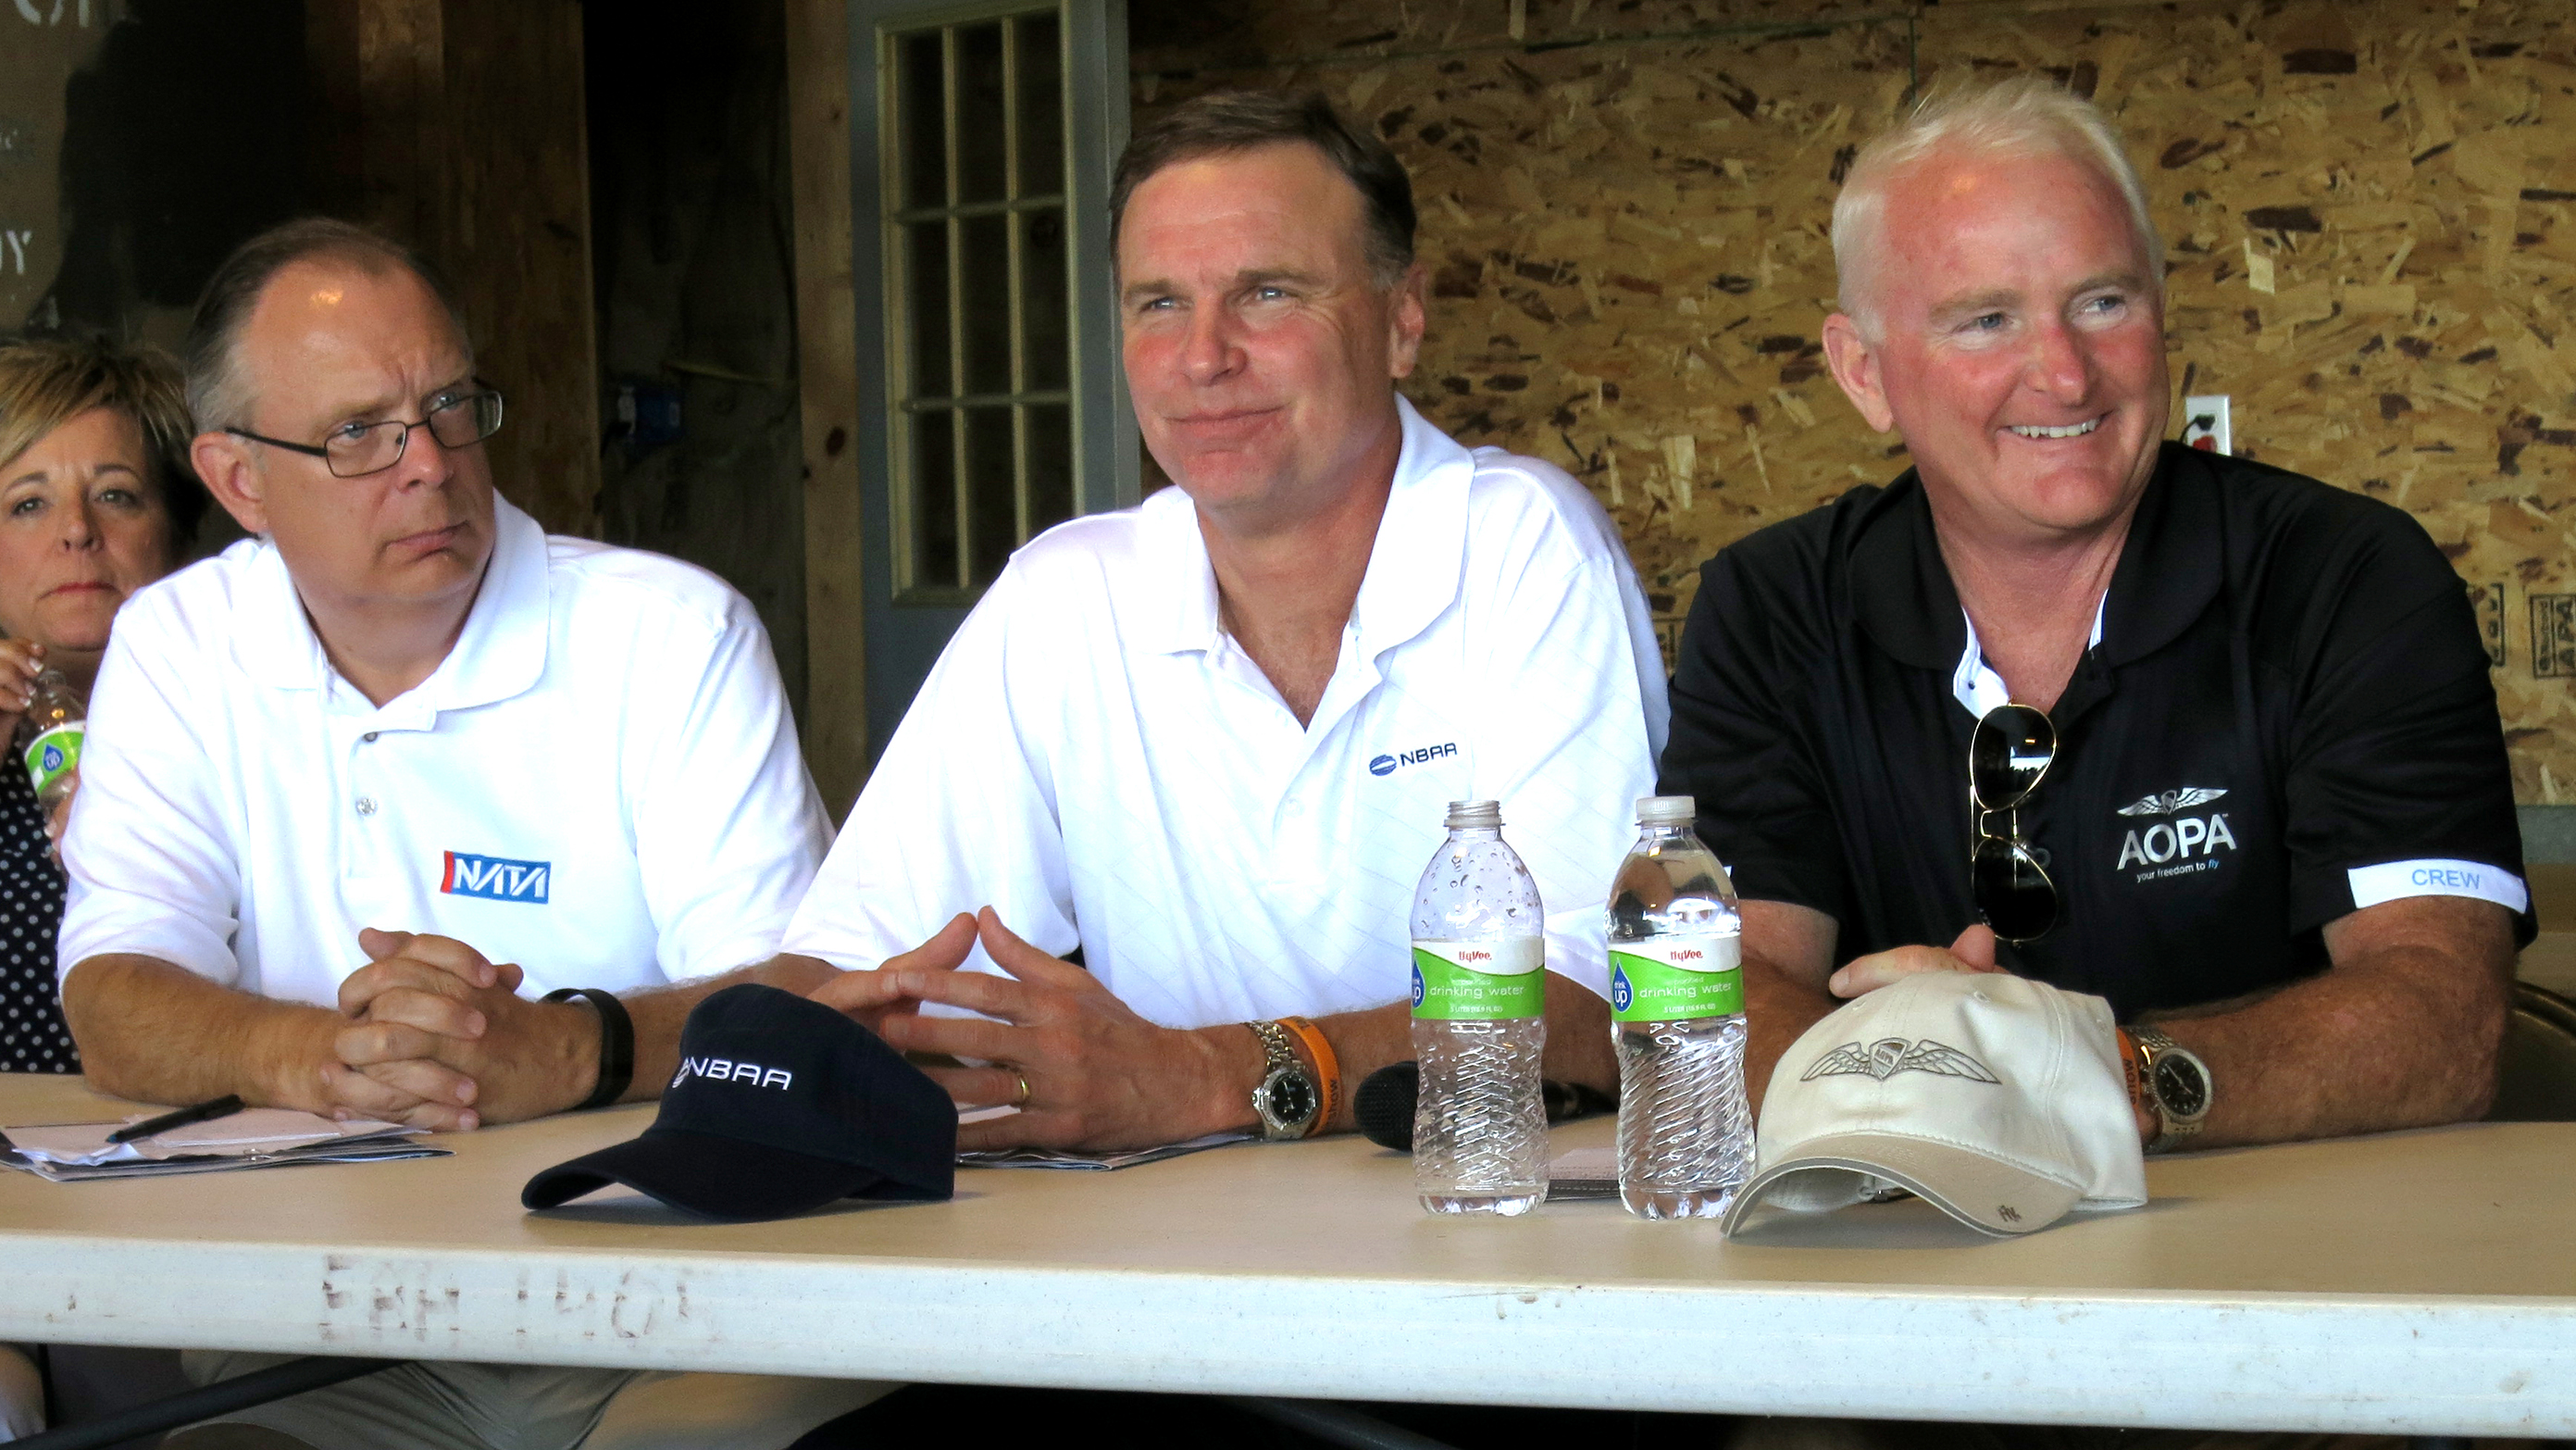 From left, NATA Executive Vice President of Government and External Affairs Bill Deere, NBAA President Ed Bolen, and AOPA President Mark Baker participate in the Wingnuts Flying Circus in Tarkio, Missouri.